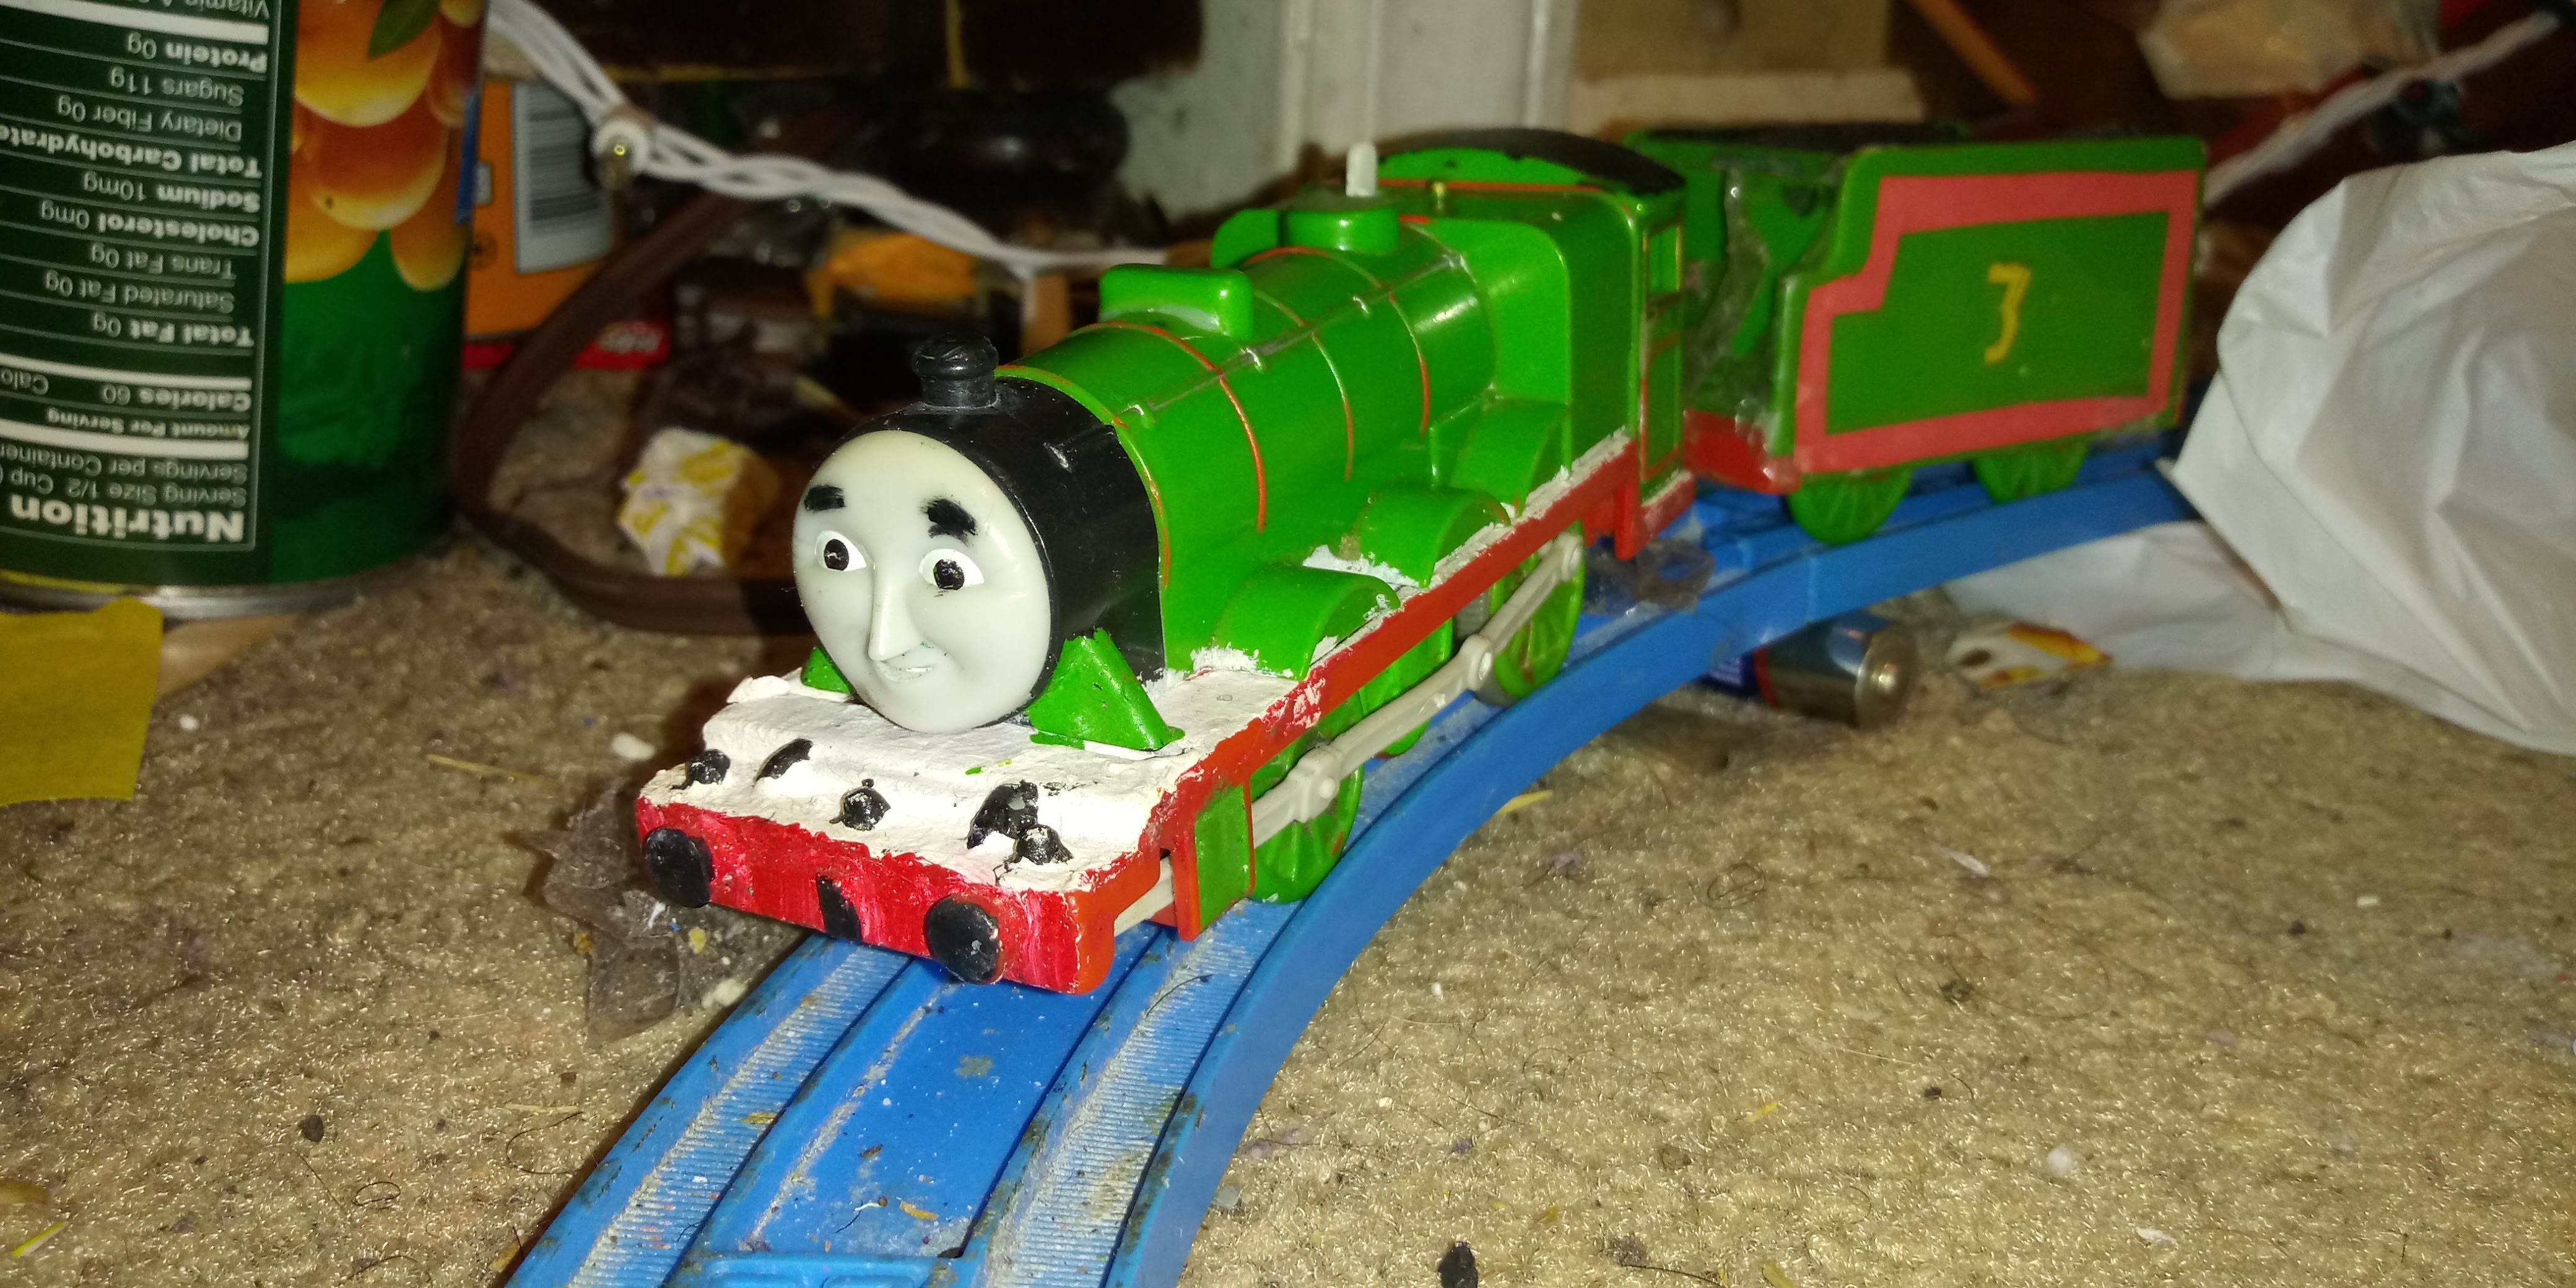 old trackmaster henry